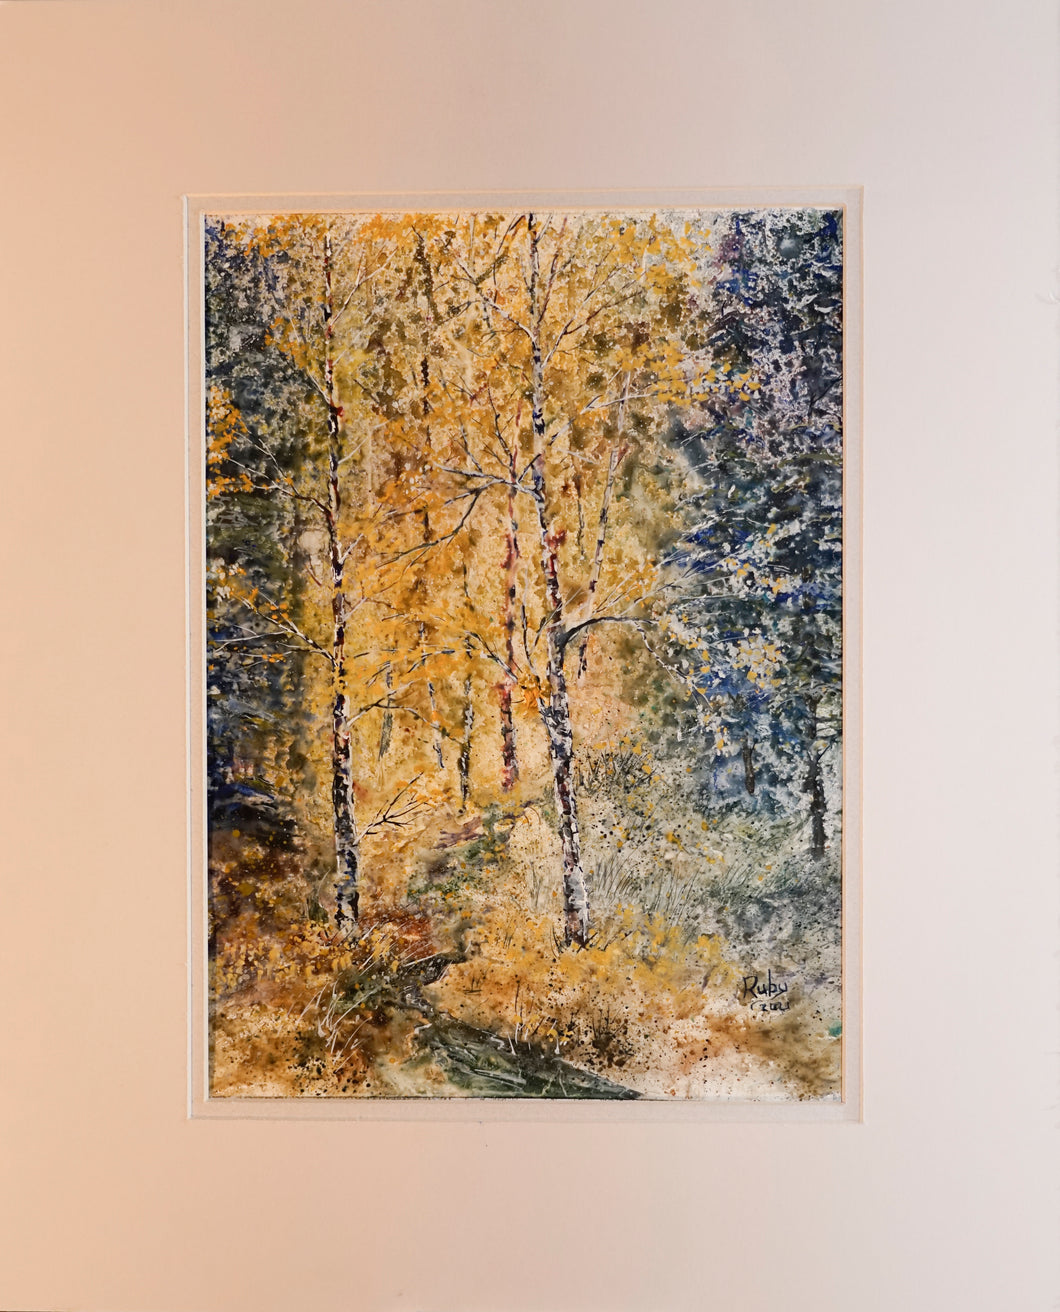 *The Blaze of Fall  (16 x 20 in. with mat)